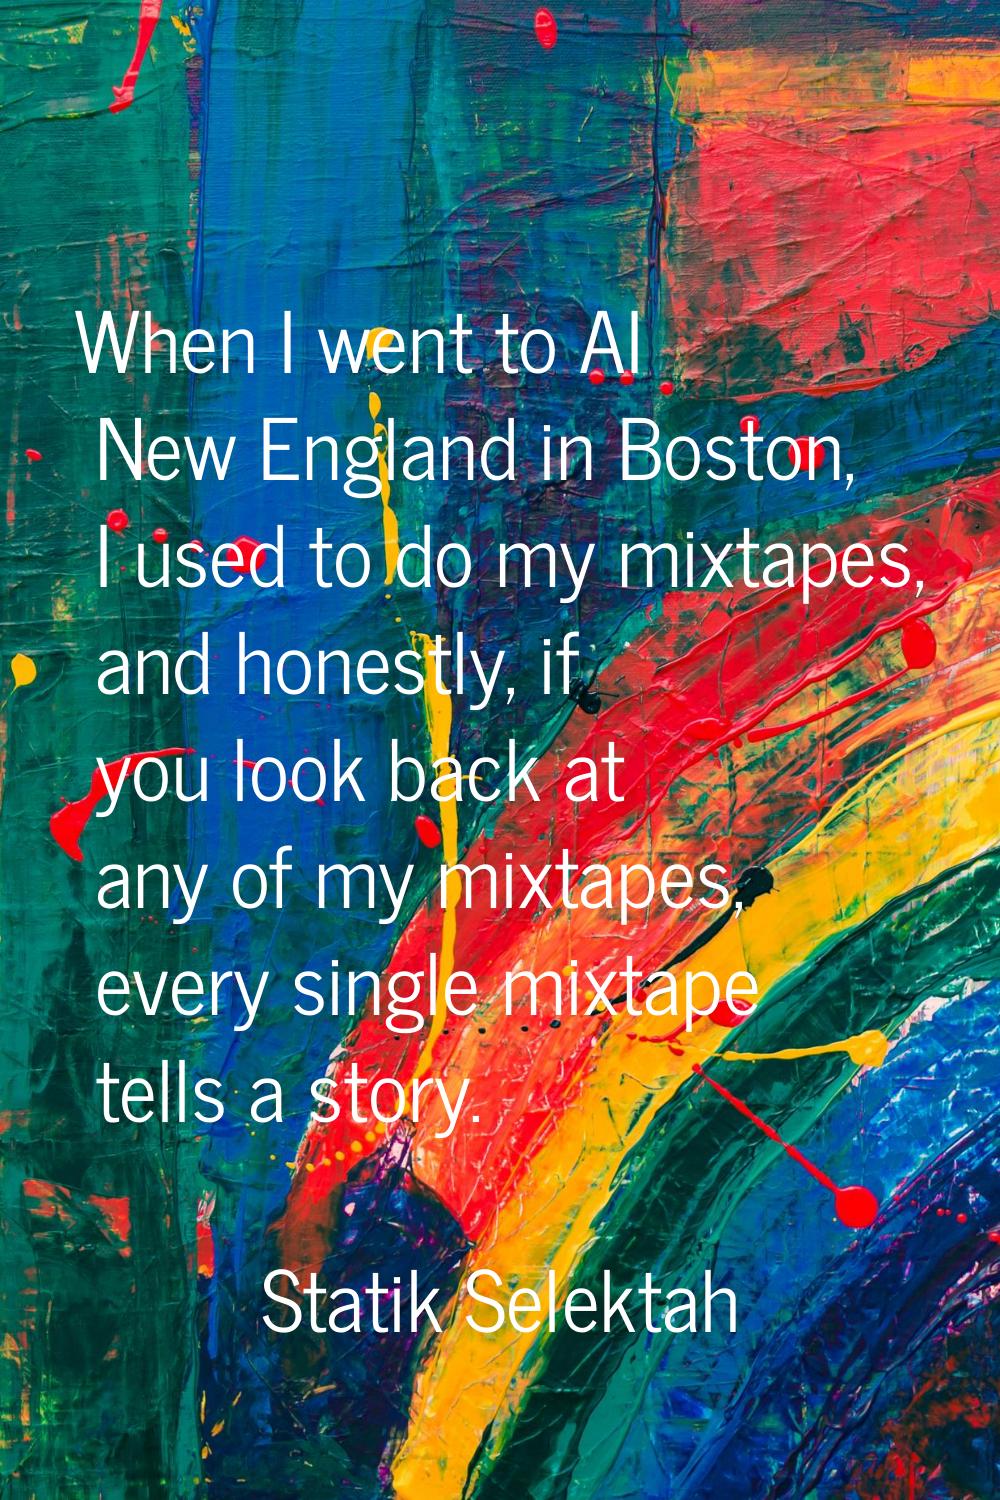 When I went to AI New England in Boston, I used to do my mixtapes, and honestly, if you look back a